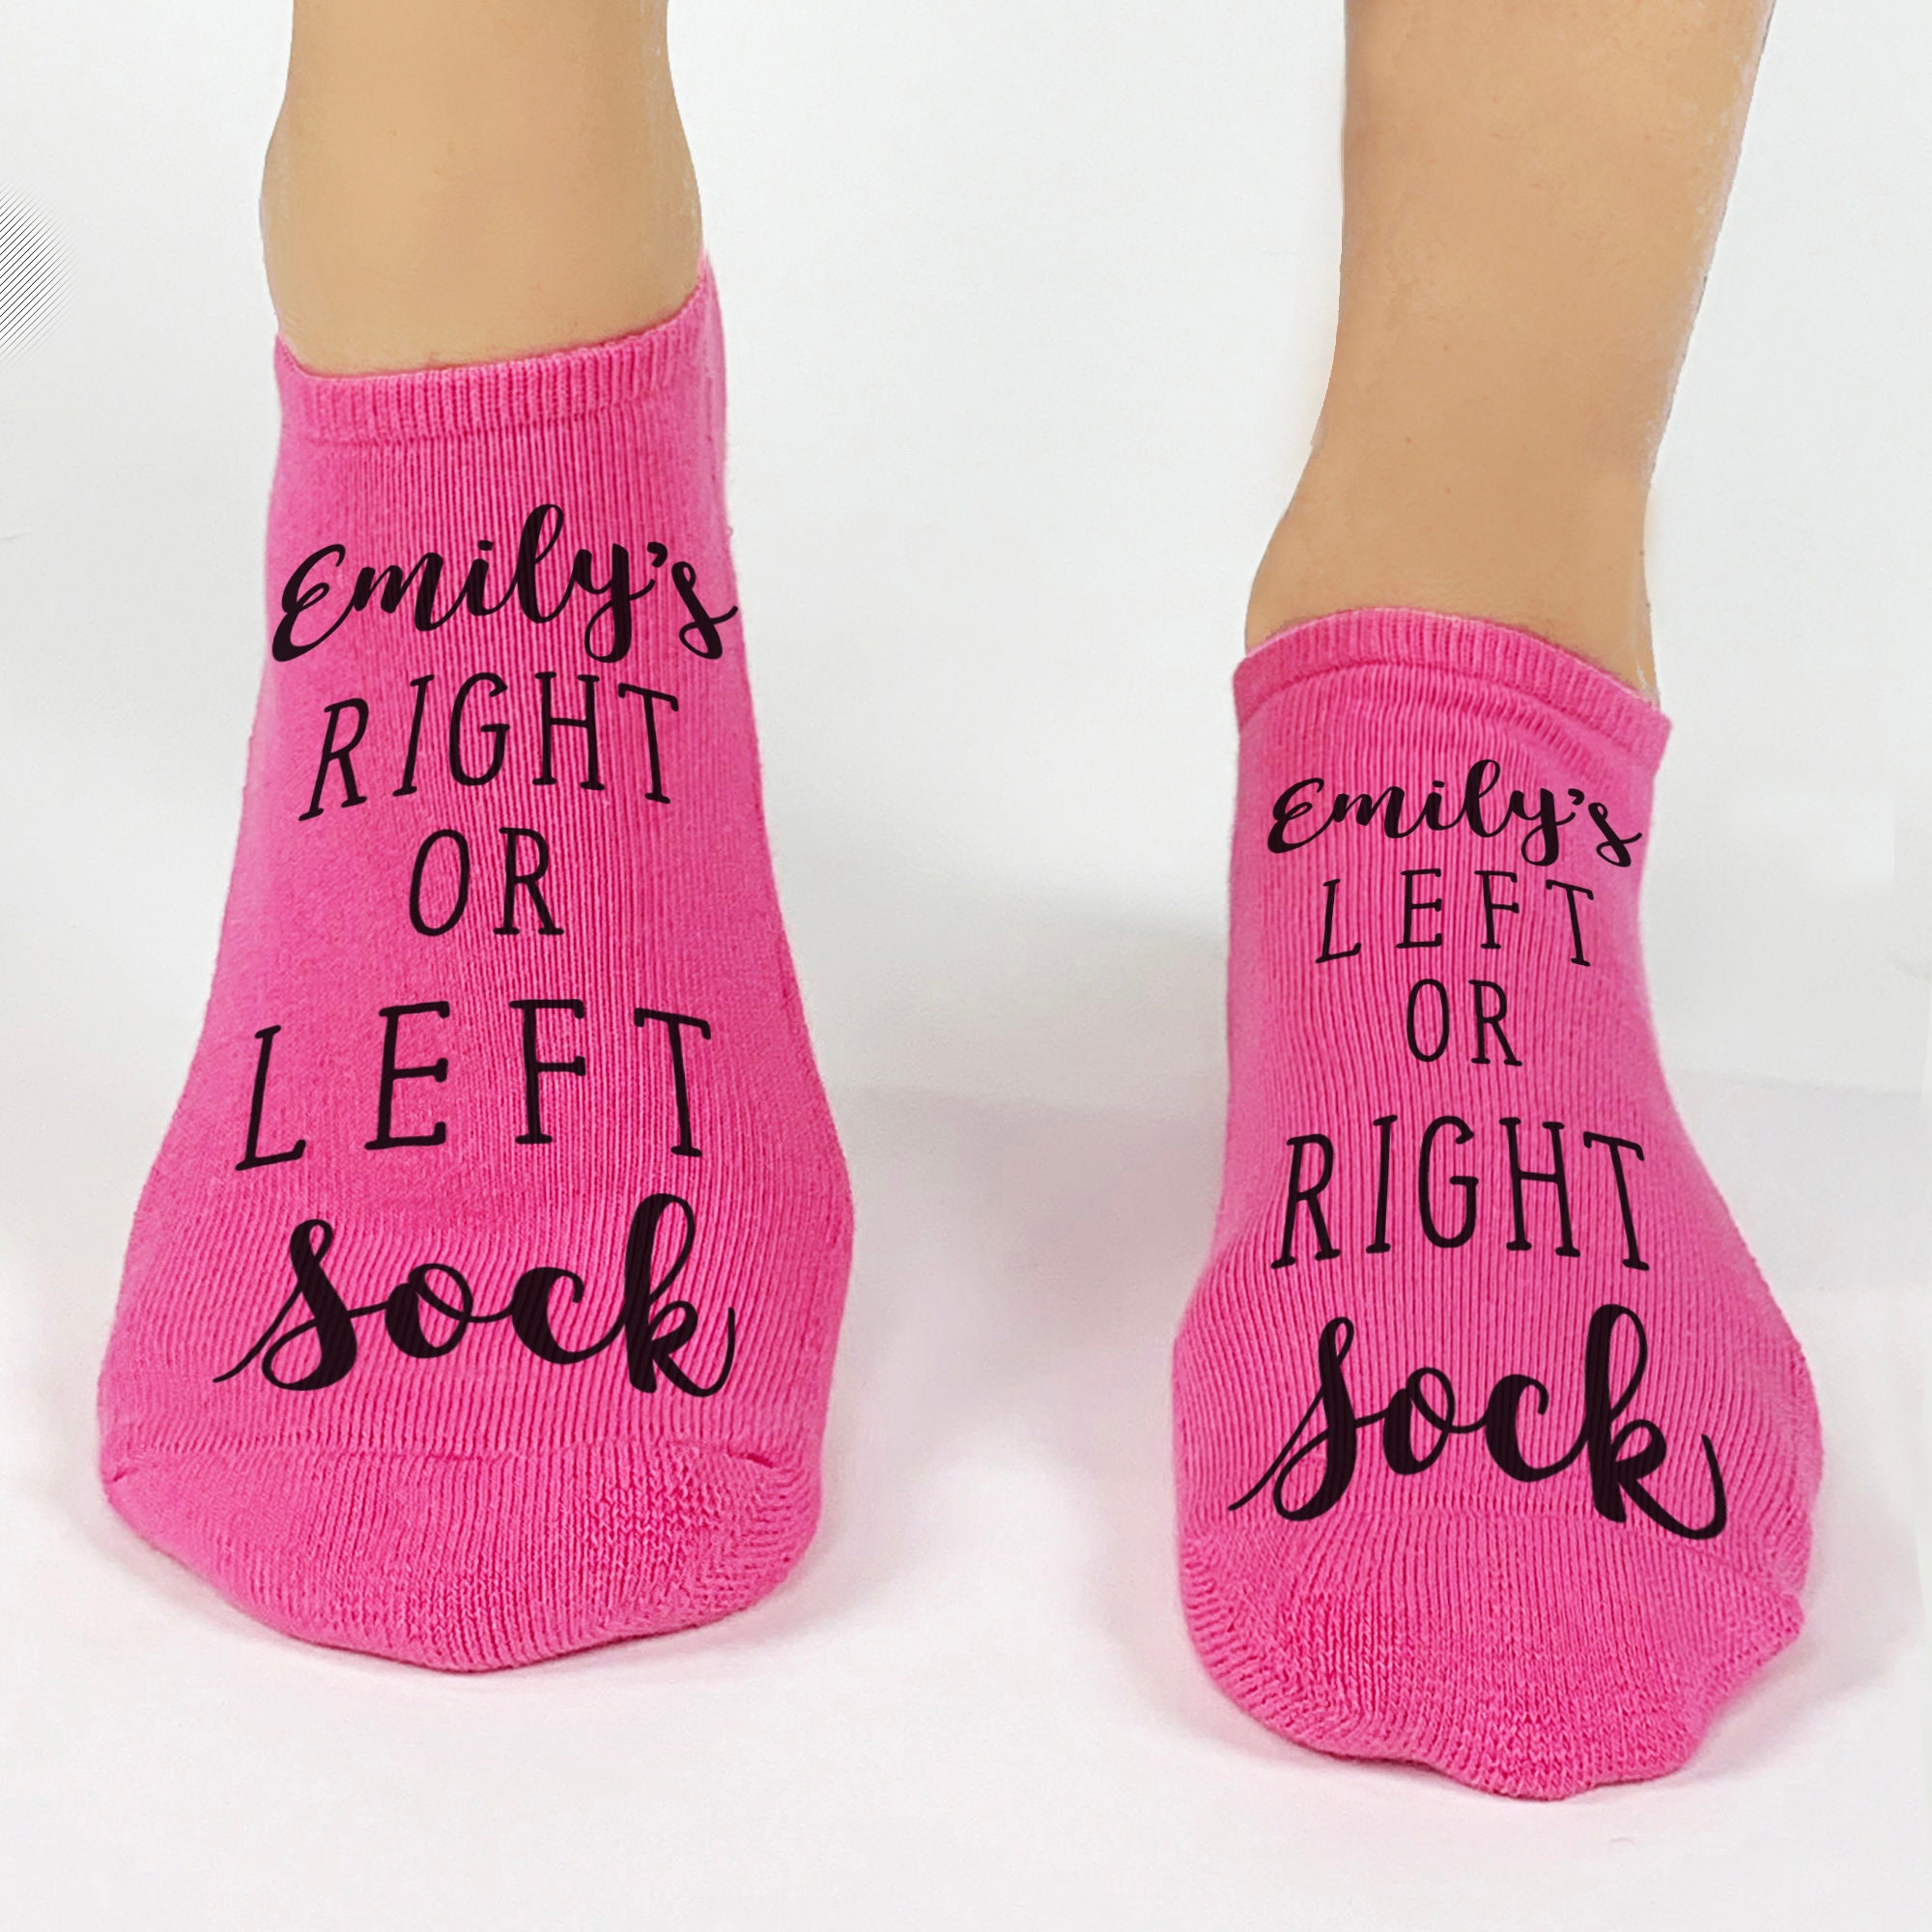 Funny Personalized Socks for Her, Custom Printed Socks With a Name